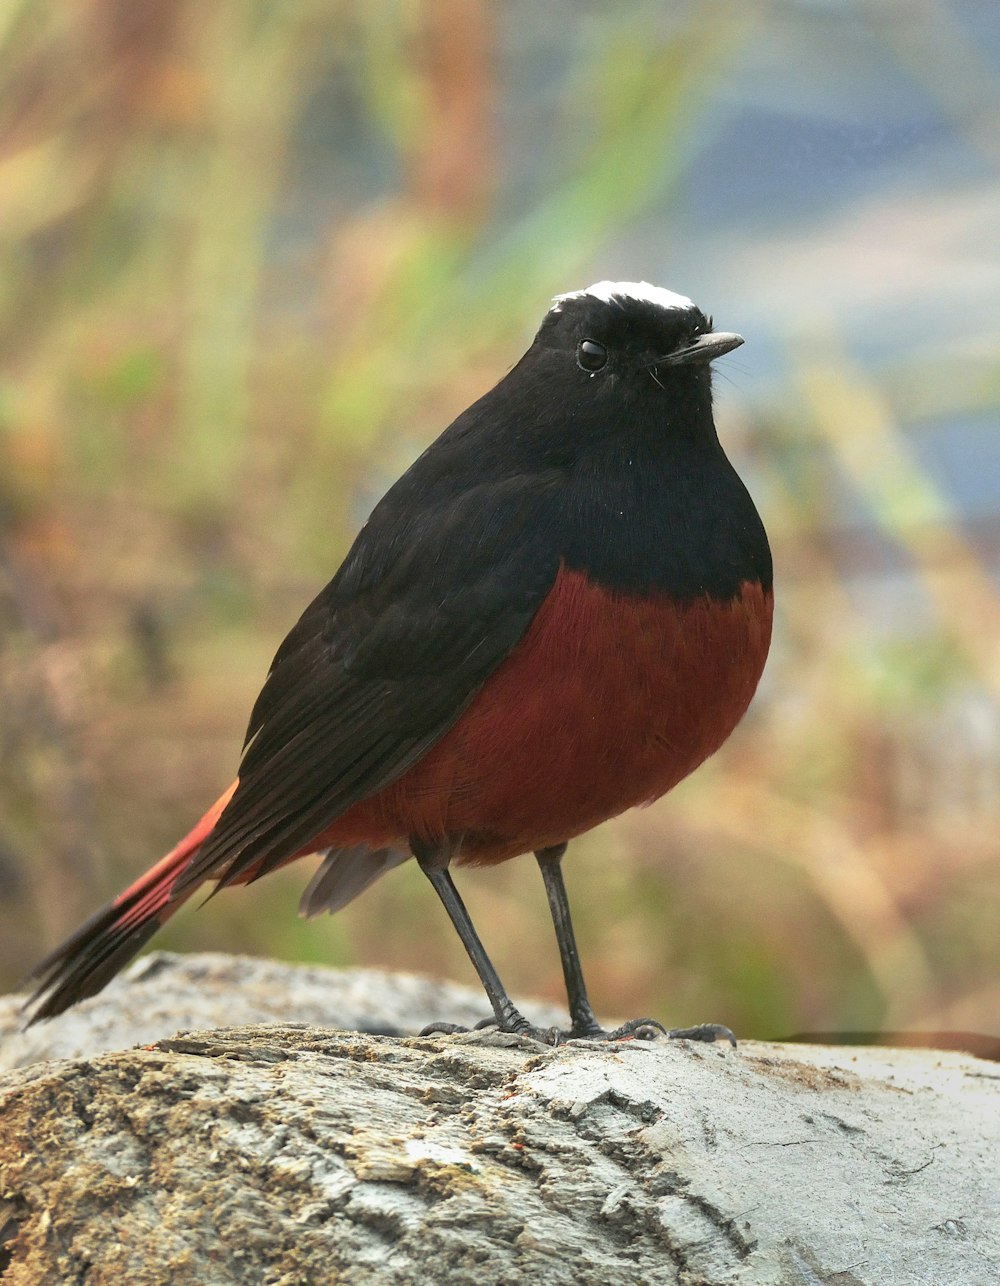 black and red bird on gray rock